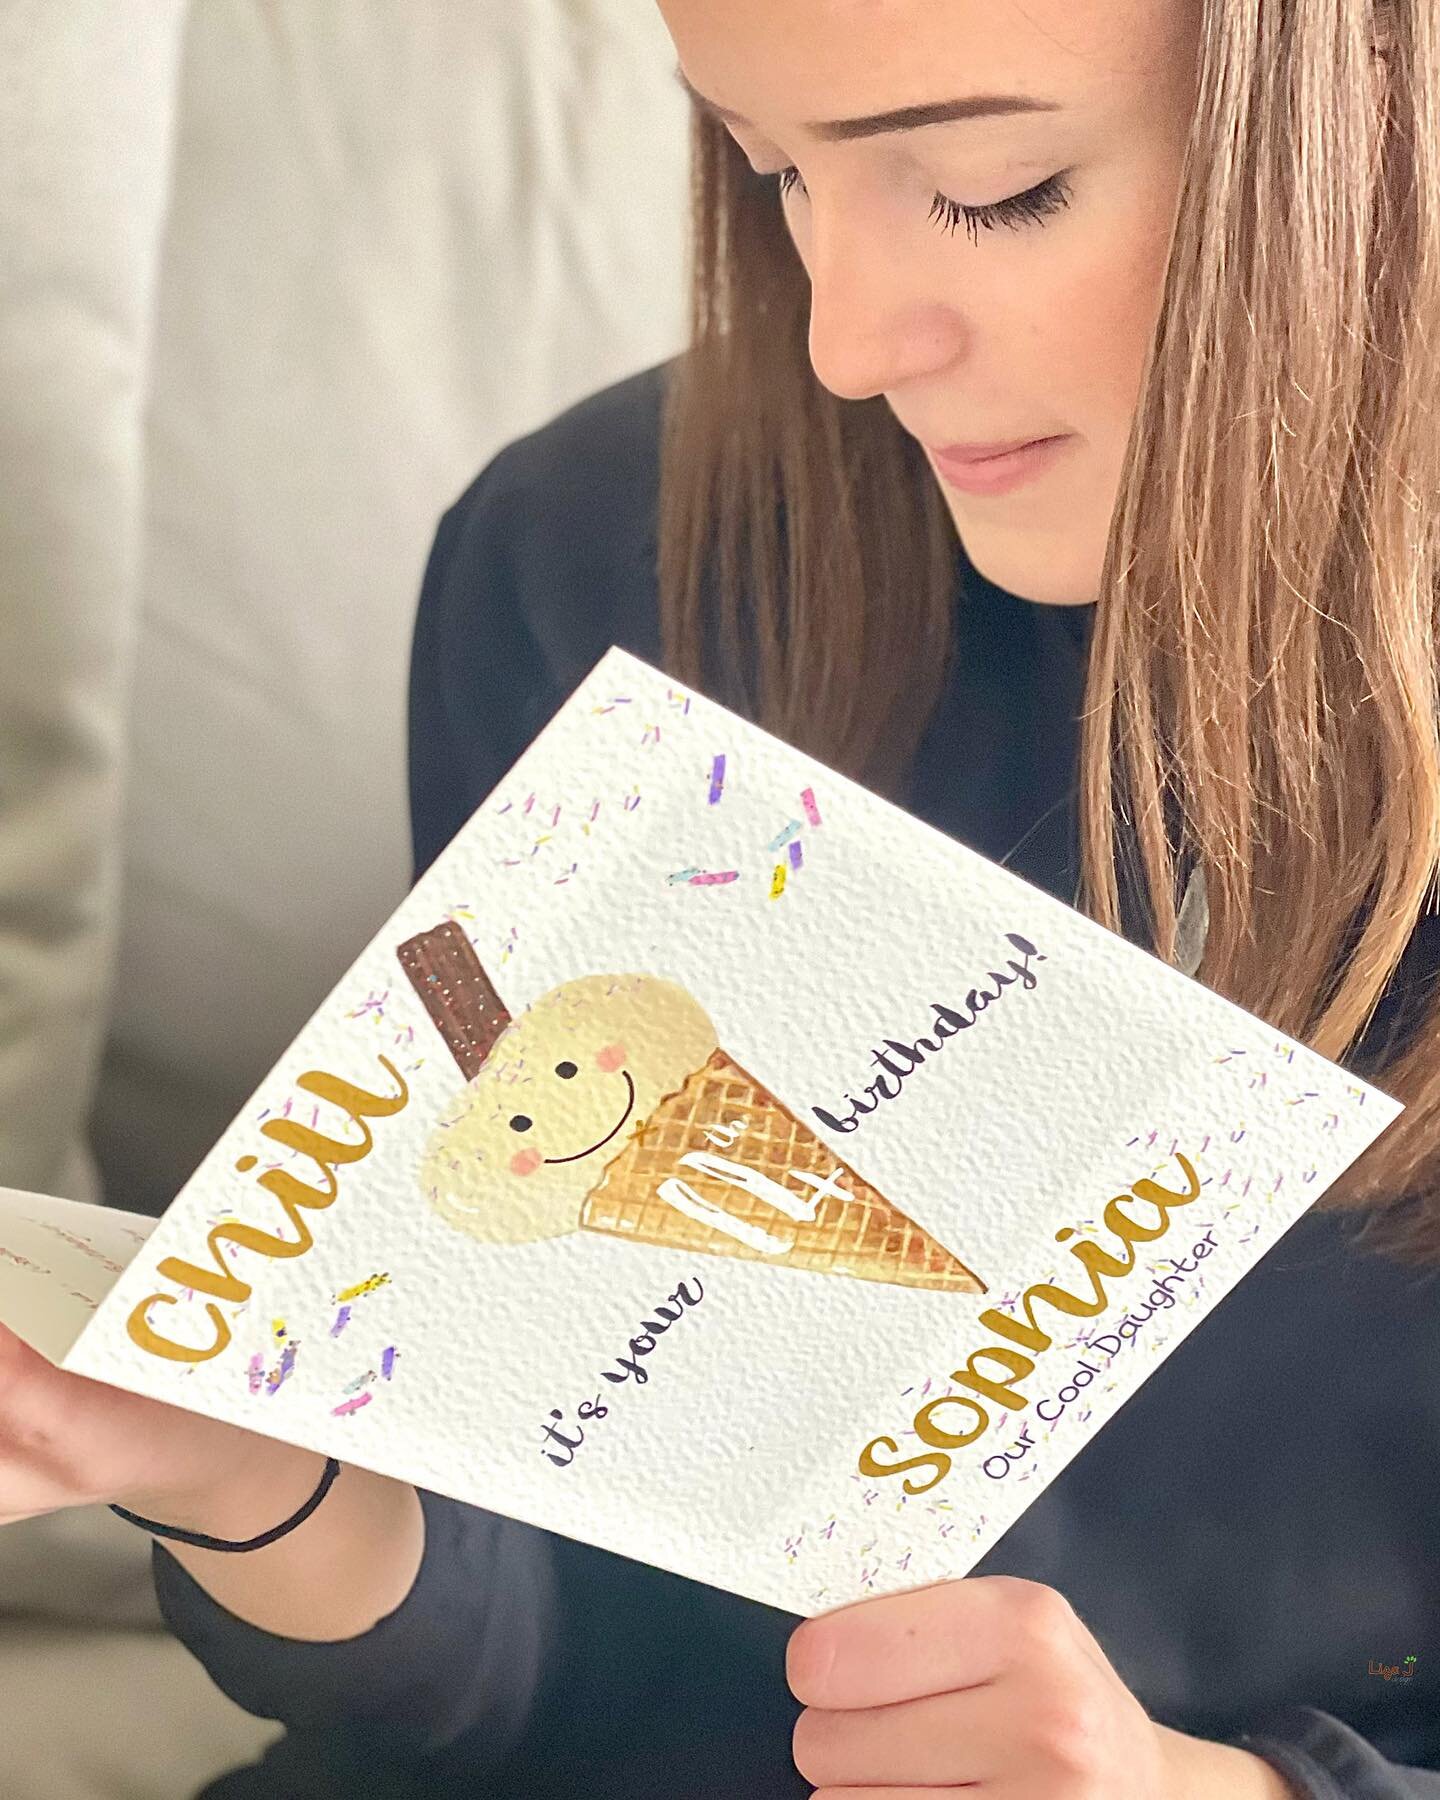 It&rsquo;s been a week of birthdays - here&rsquo;s the obligatory yearly shot showing the new design birthday card, this year - my daughters favourite 🍦 x
#icecreambirthday